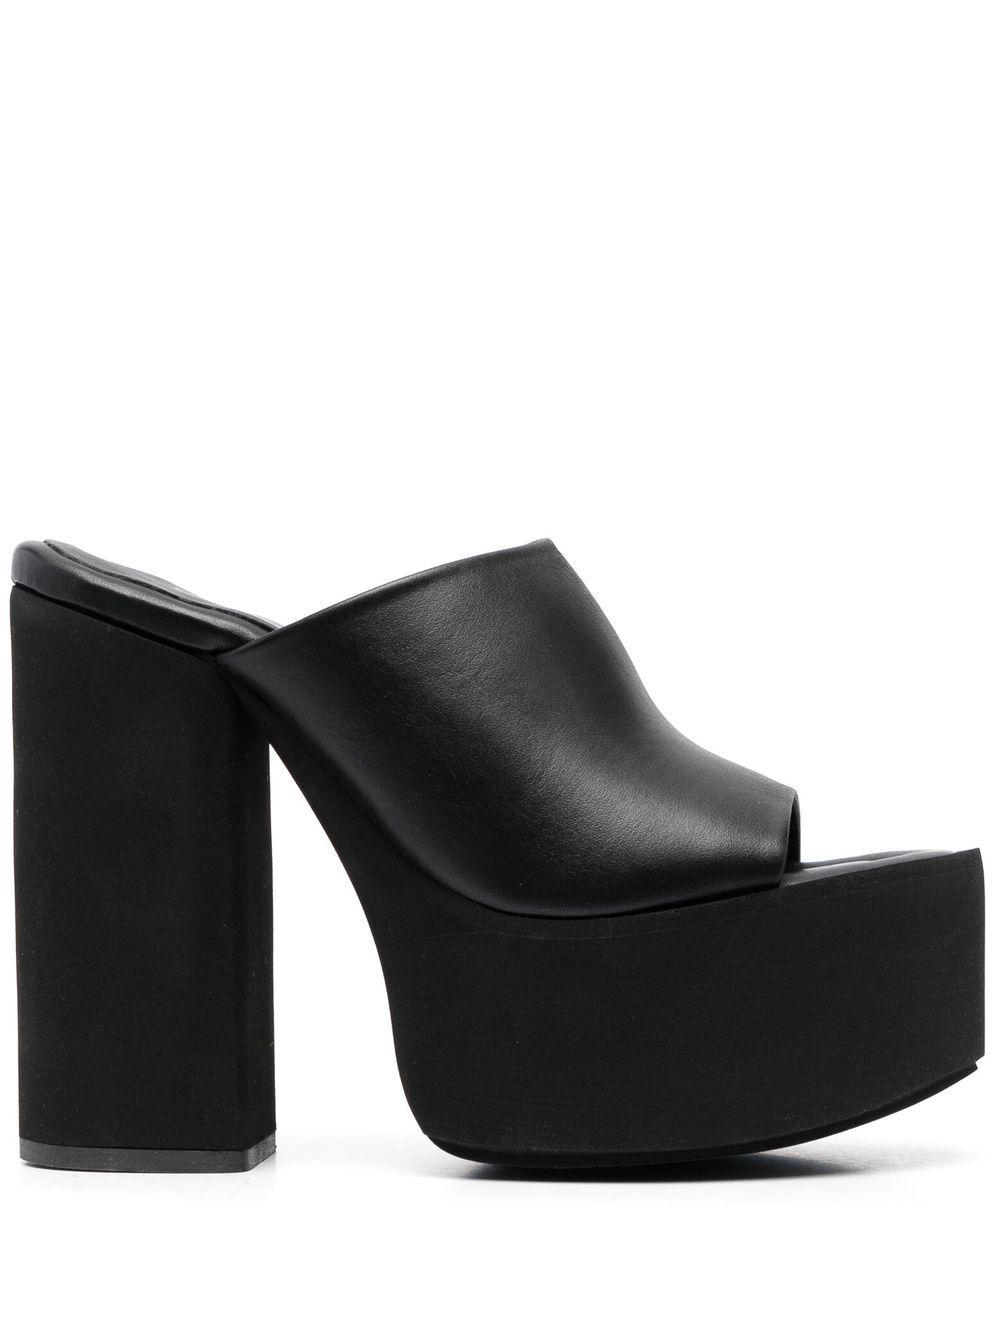 Paloma Barceló Evanthe Leather Mules in Black | Lyst